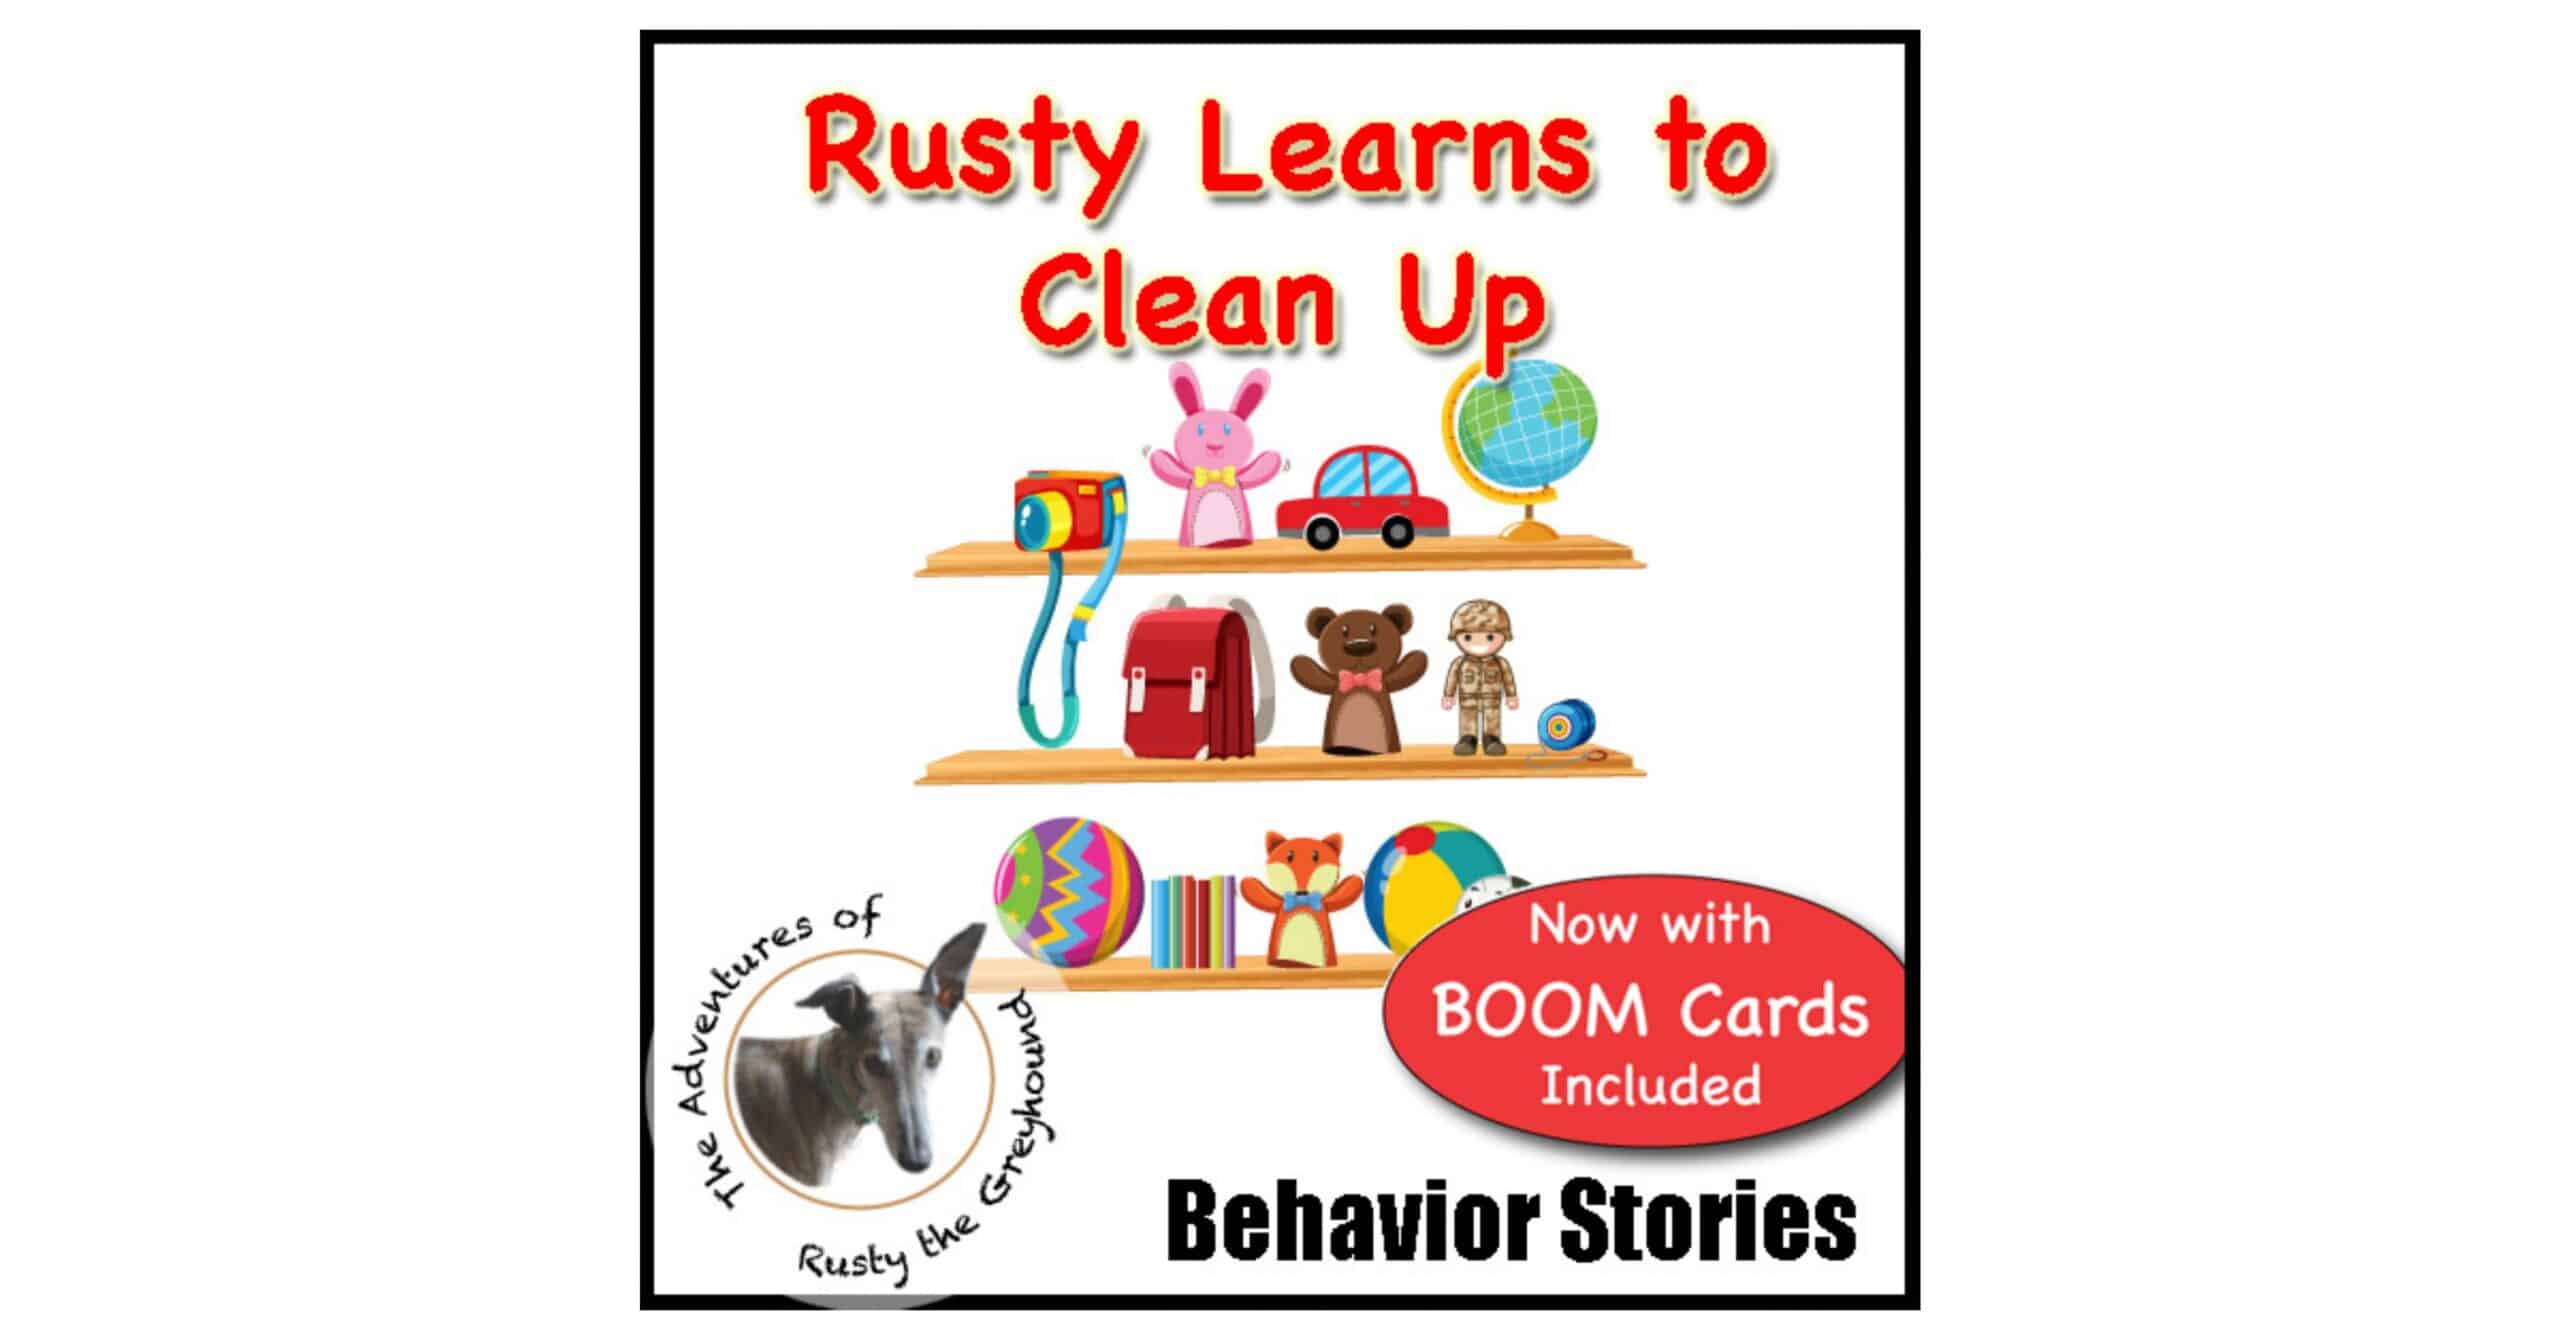 Classroom Clean-up as a Behavior Management Strategy